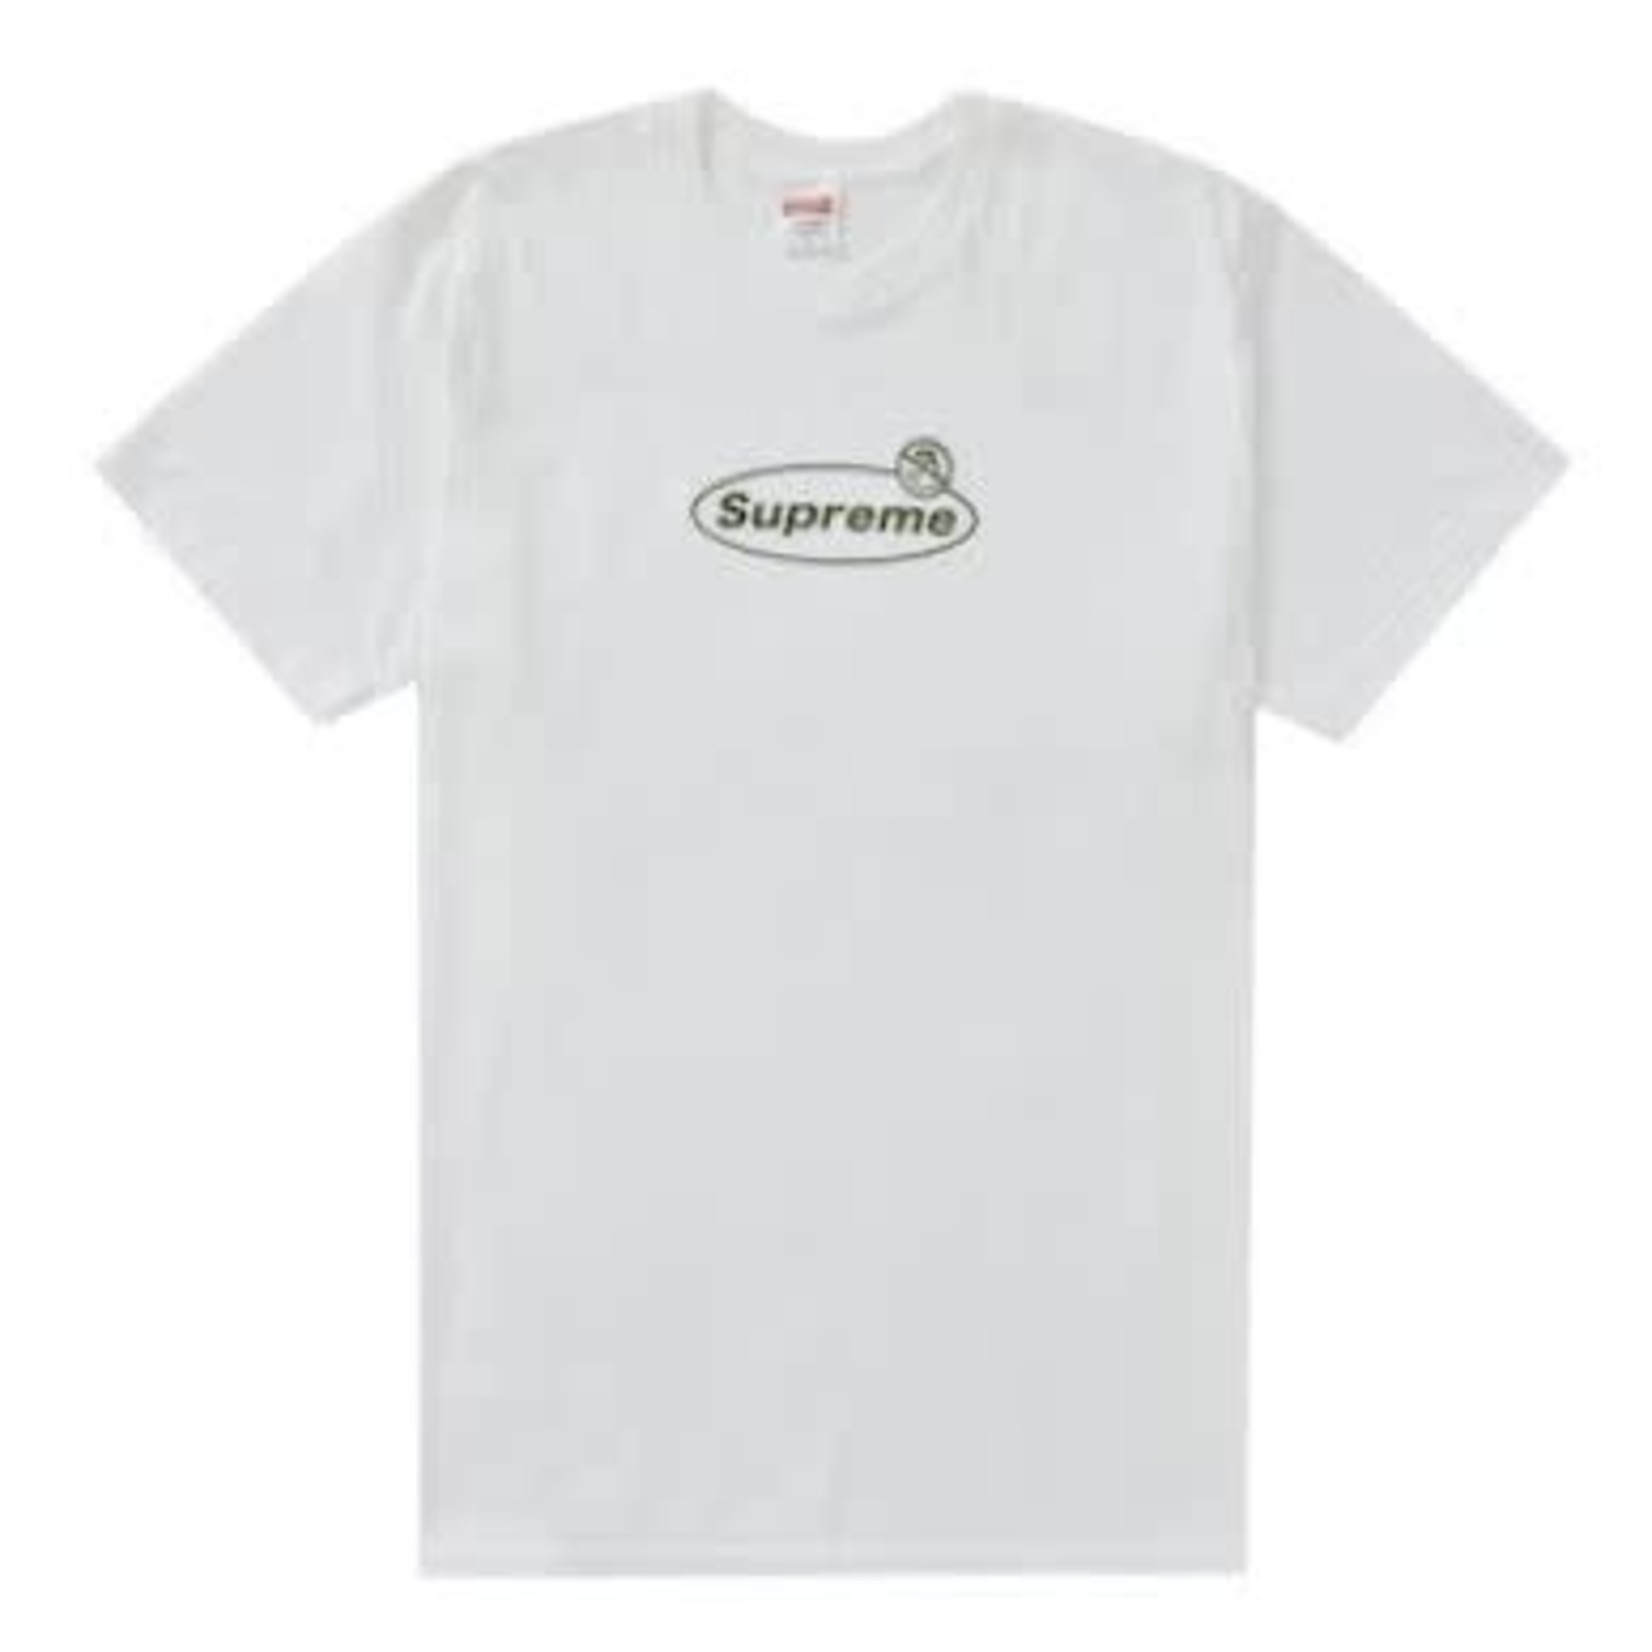 Supreme Supreme Warning Tee White Size Large, DS BRAND NEW